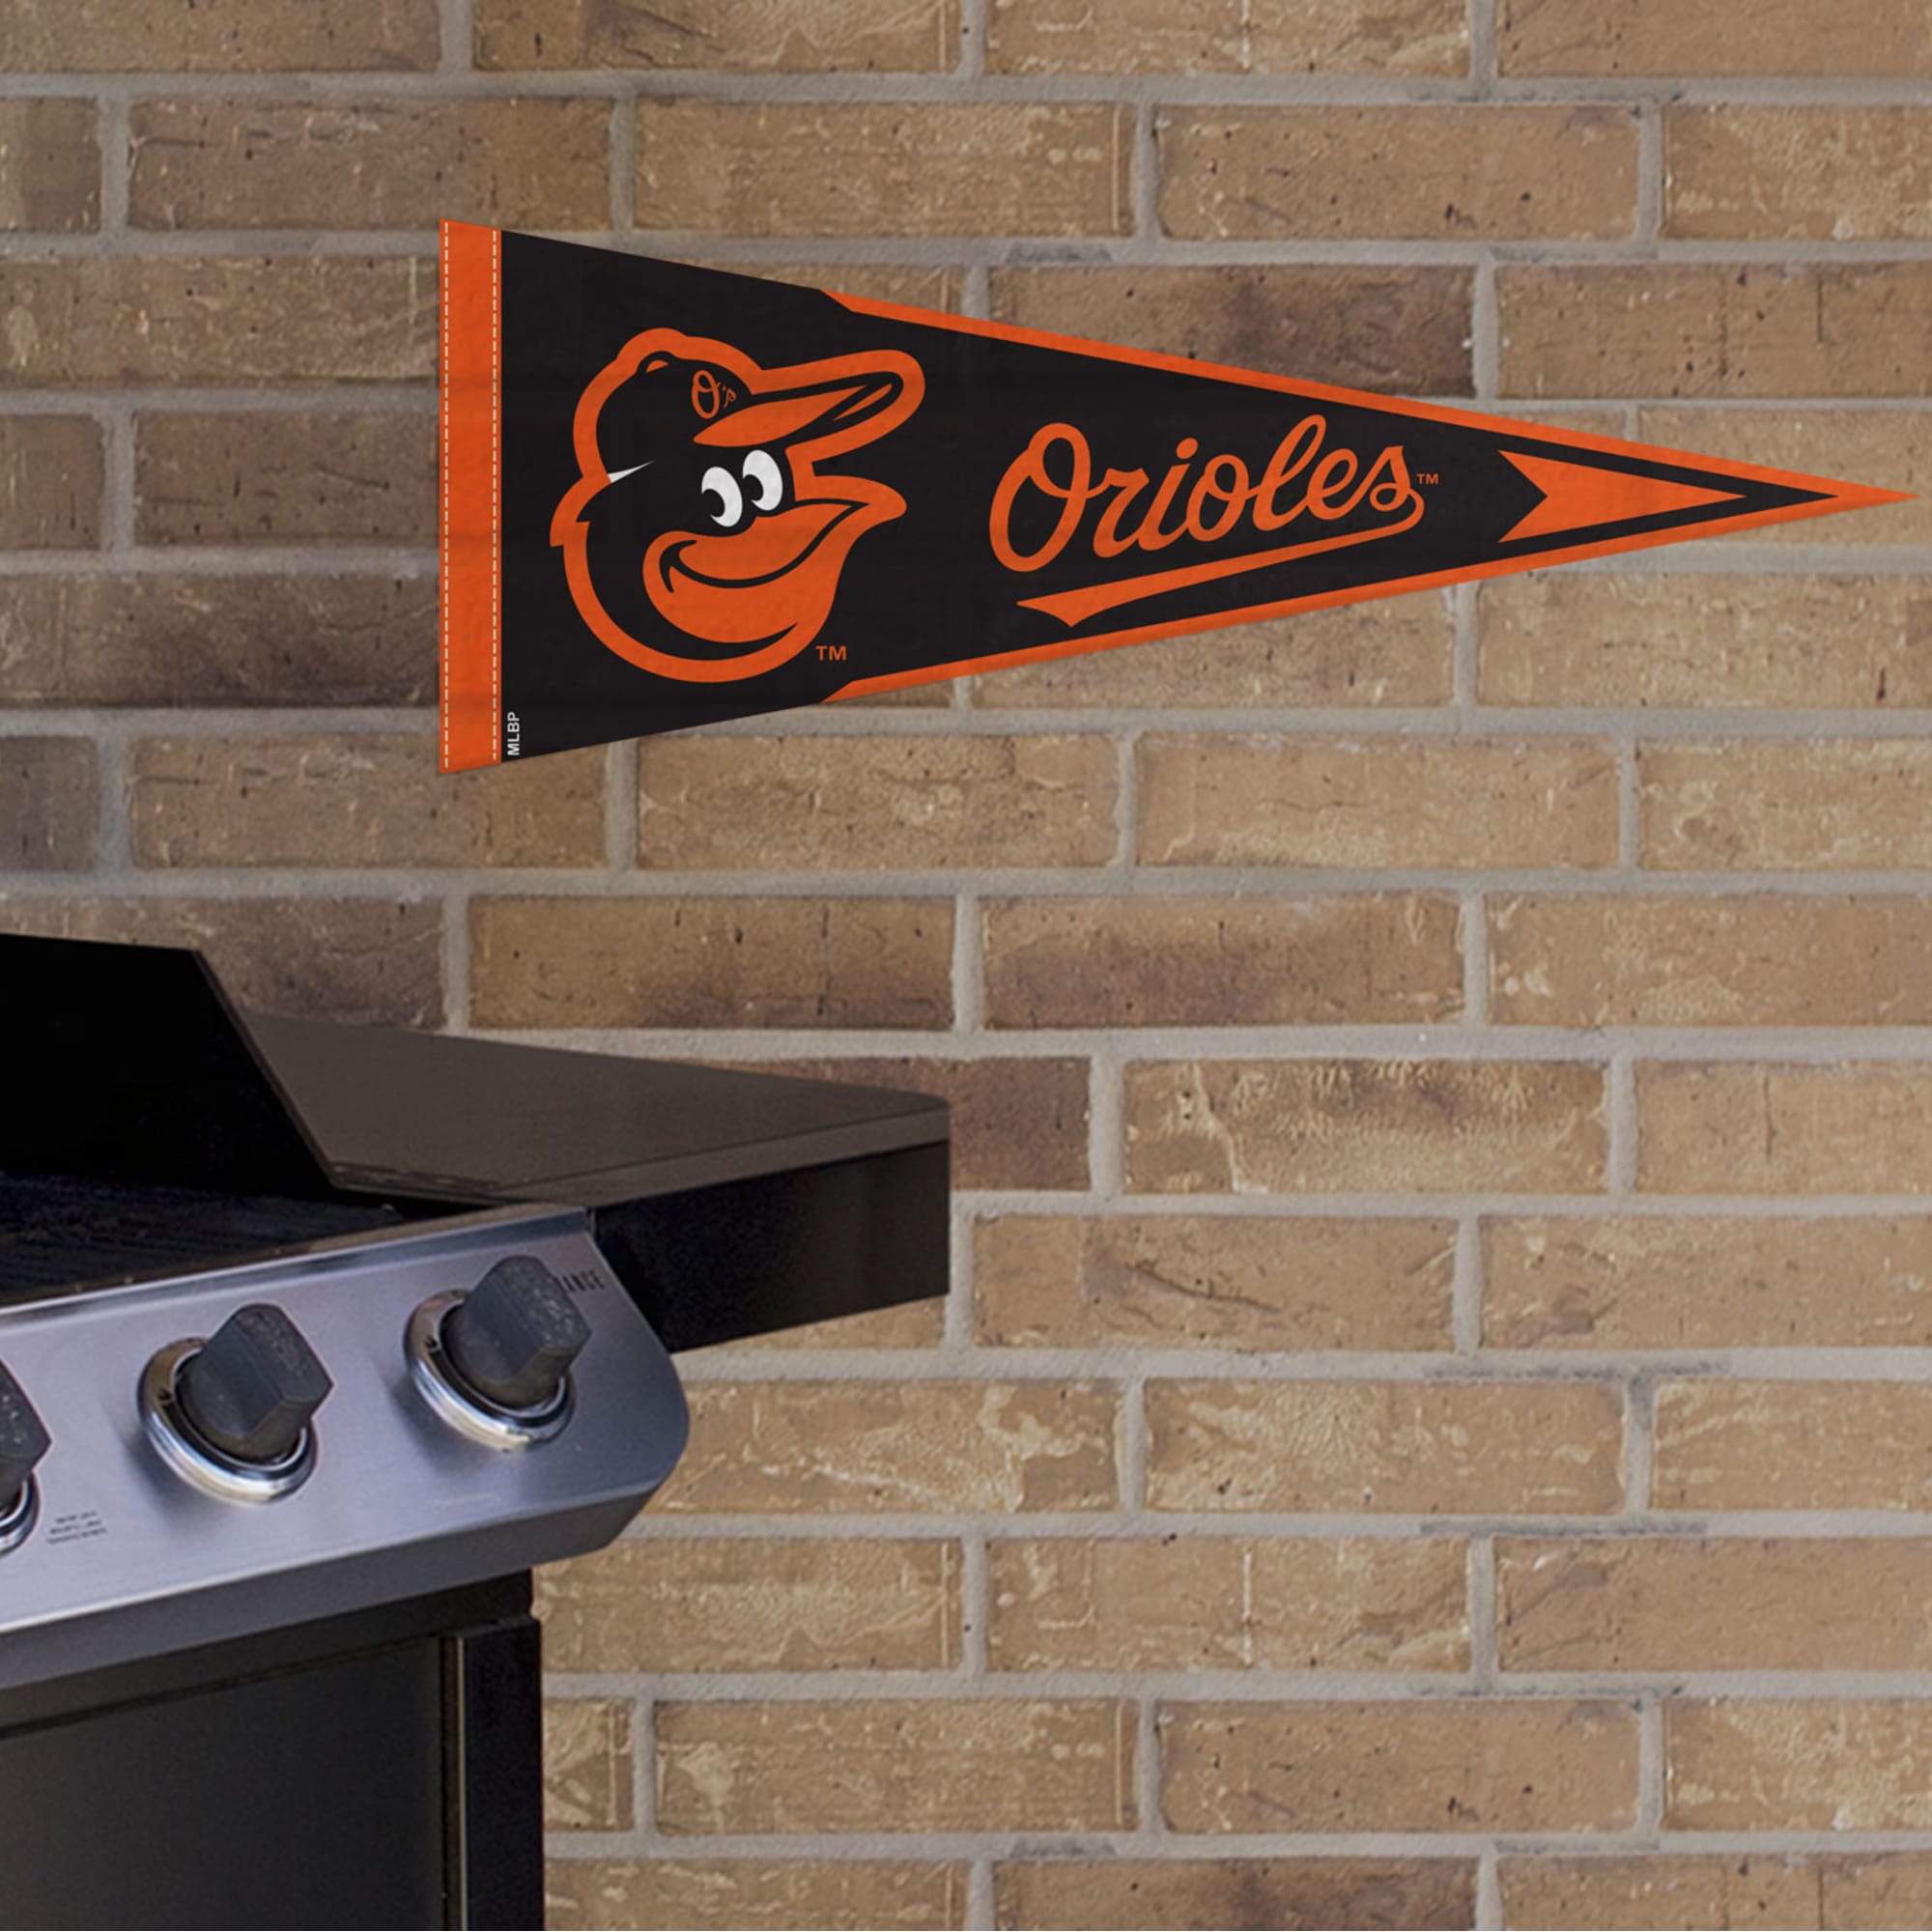 Baltimore Orioles: Pennant - Officially Licensed MLB Outdoor Graphic 24.0"W x 9.0"H by Fathead | Wood/Aluminum